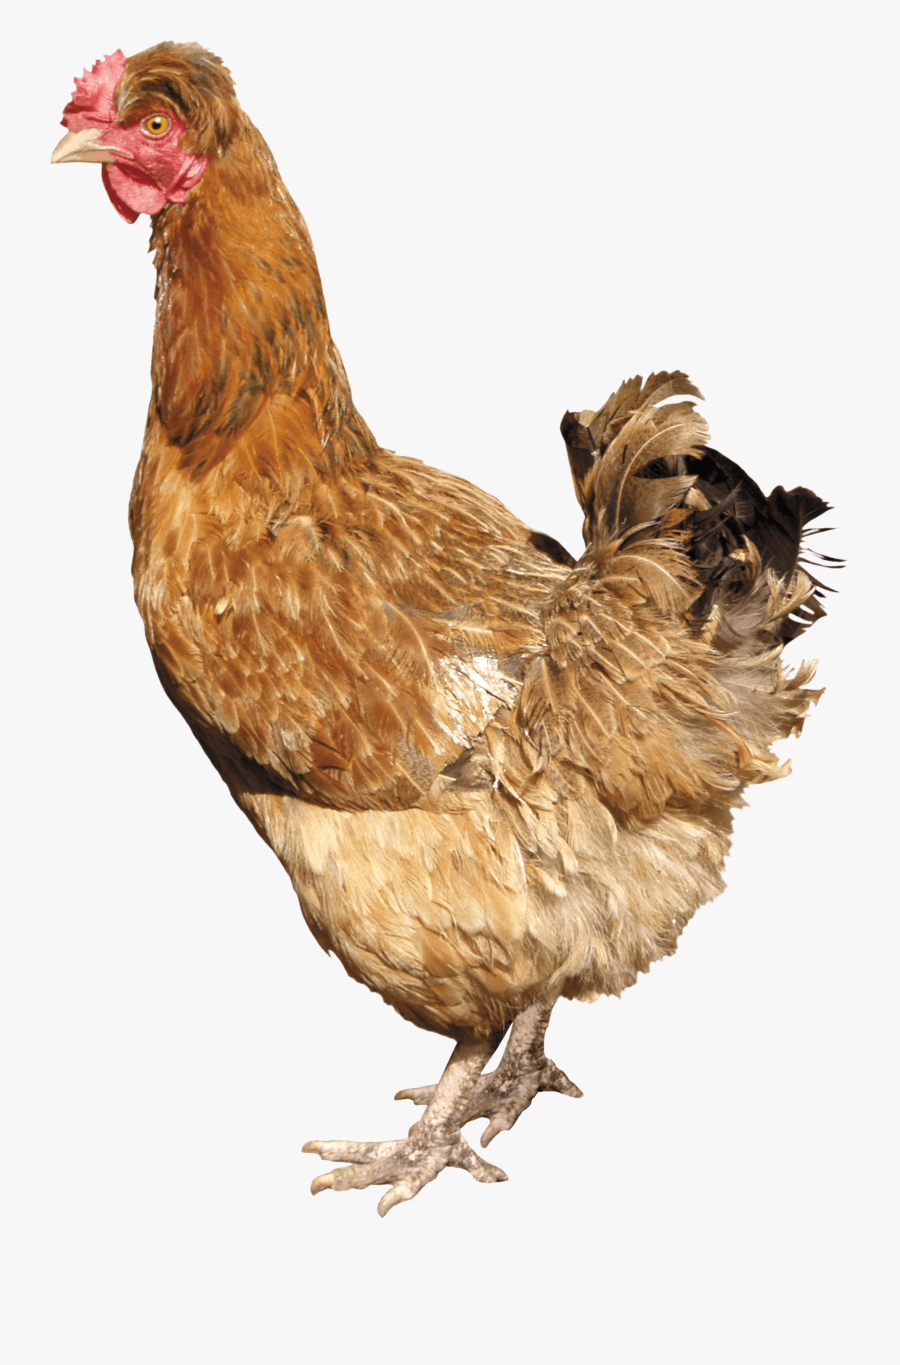 Download Chicken Png Image Png Image Pngimg - Chickens .png, Transparent Clipart